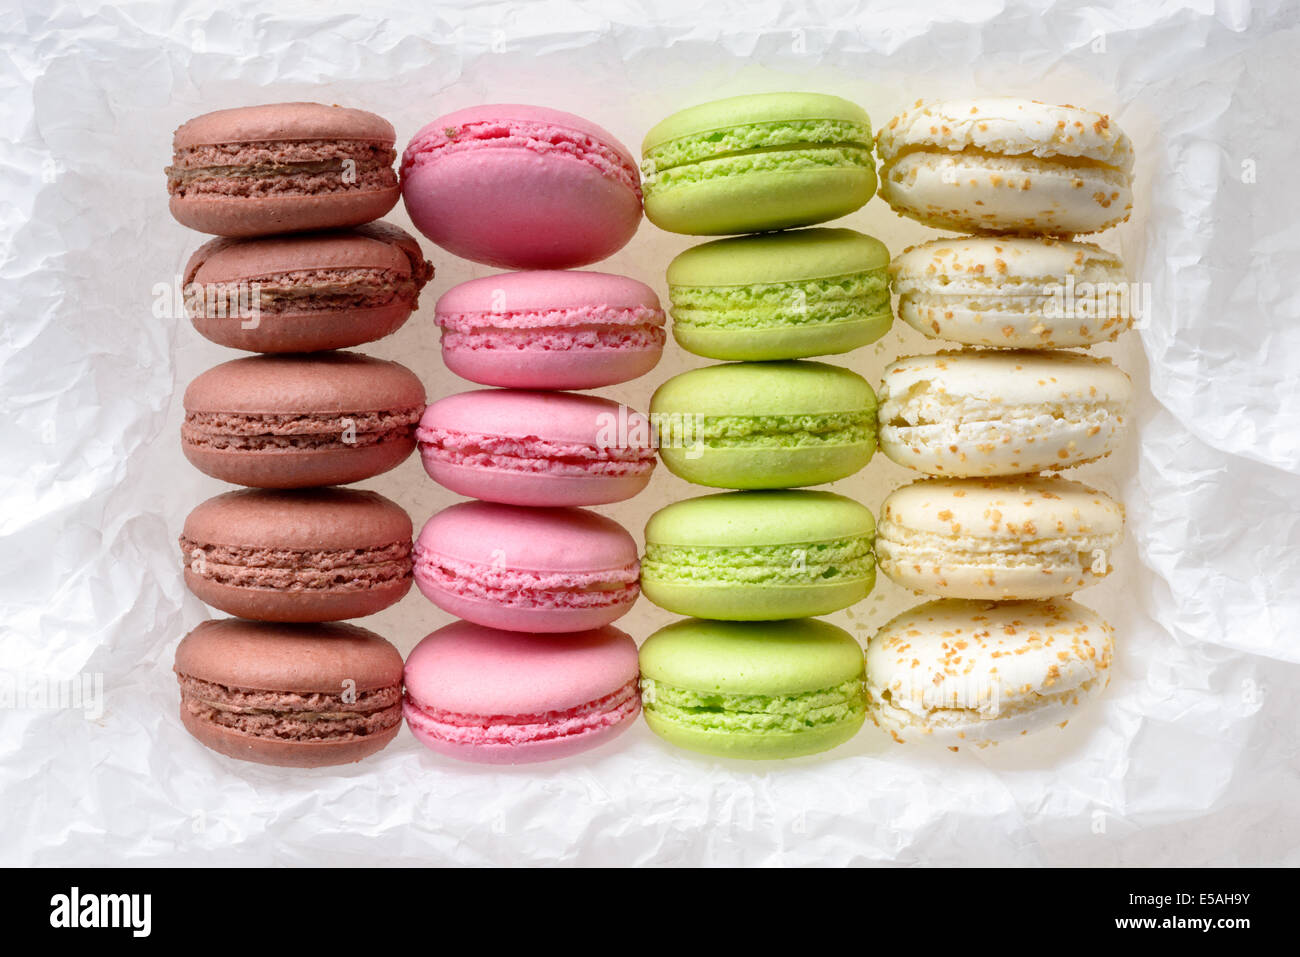 Food: multicolored macarons assortment, arranged on white crumpled paper, isolated on white background Stock Photo